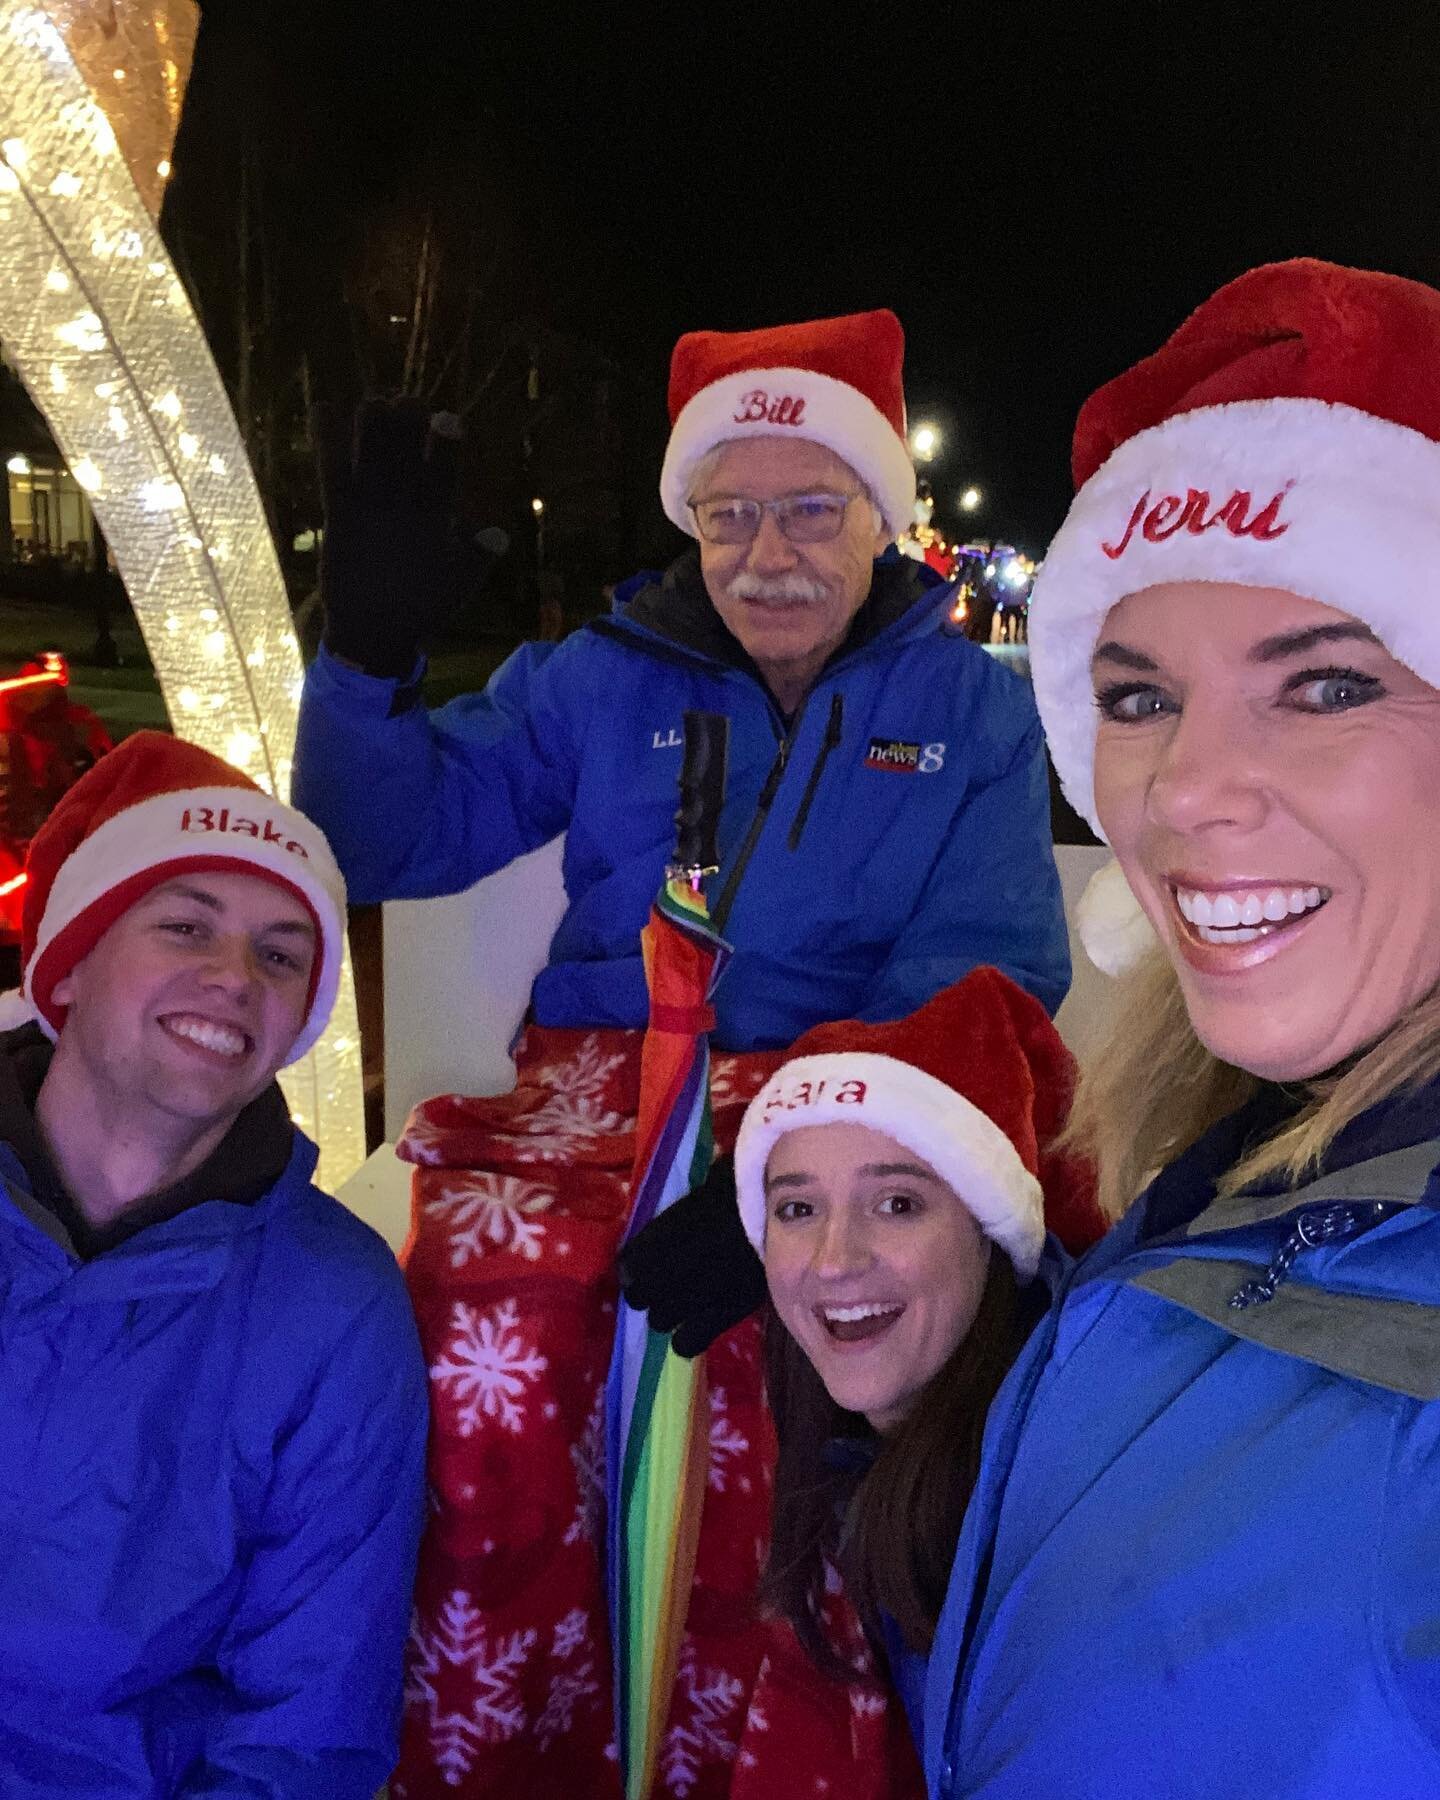 Mild and a little soggy, but such a festive evening at the Holland Parade of Lights! @saraflynnwx @wxblakeharms @terrideboer @kirkwoodwx8 @woodtv #wmiwx #news8 #earlyclub